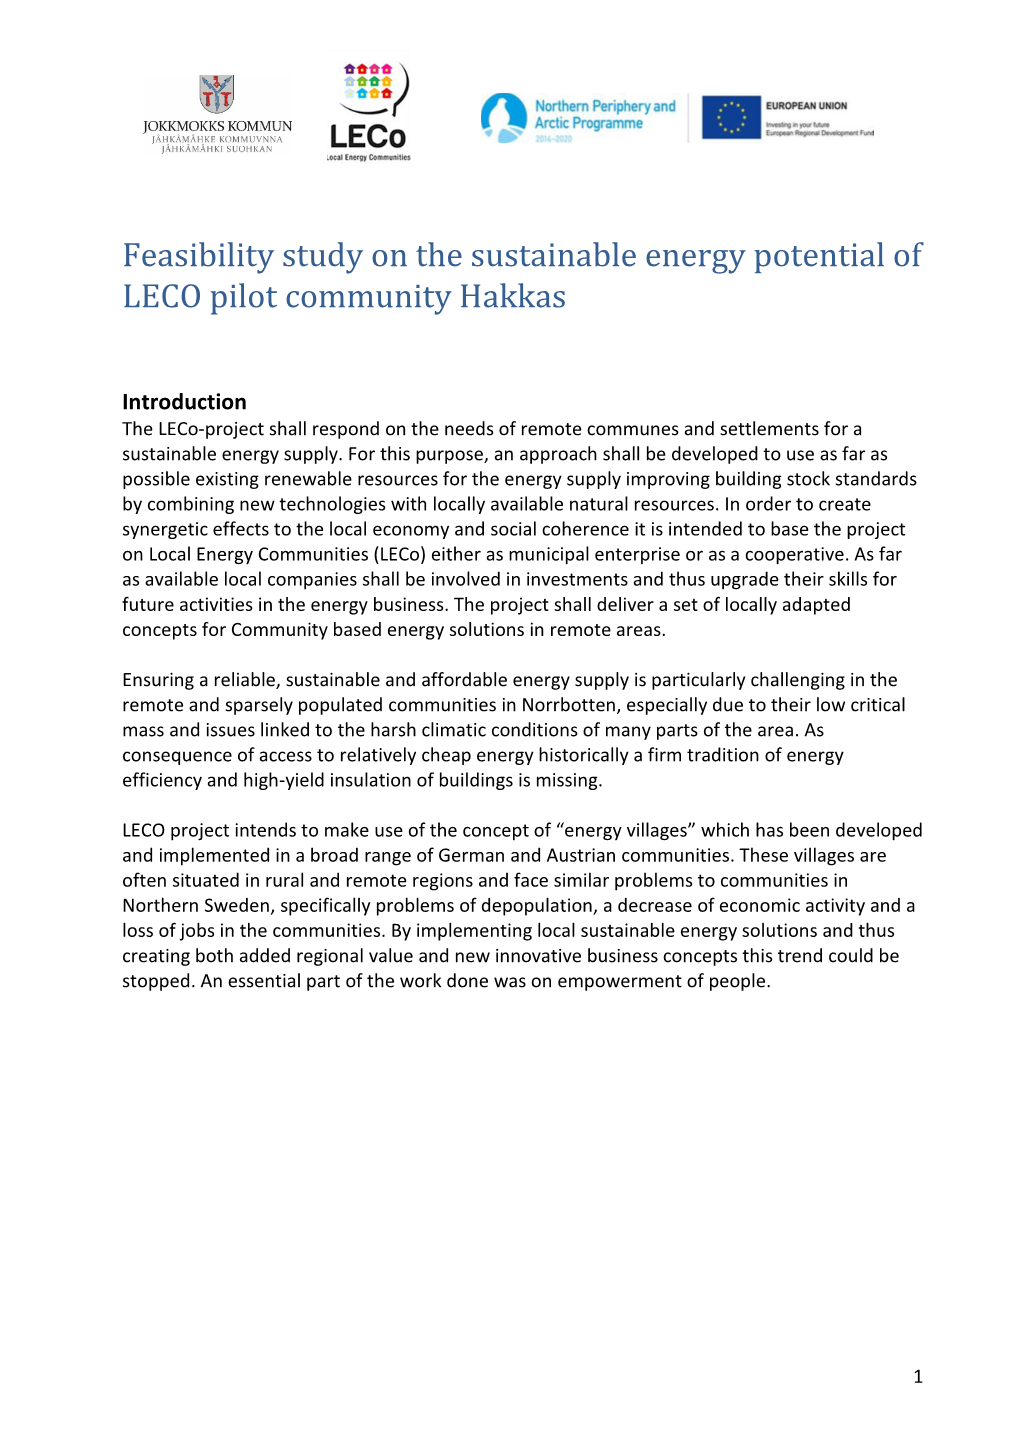 Feasibility Study on the Sustainable Energy Potential of LECO Pilot Community Hakkas